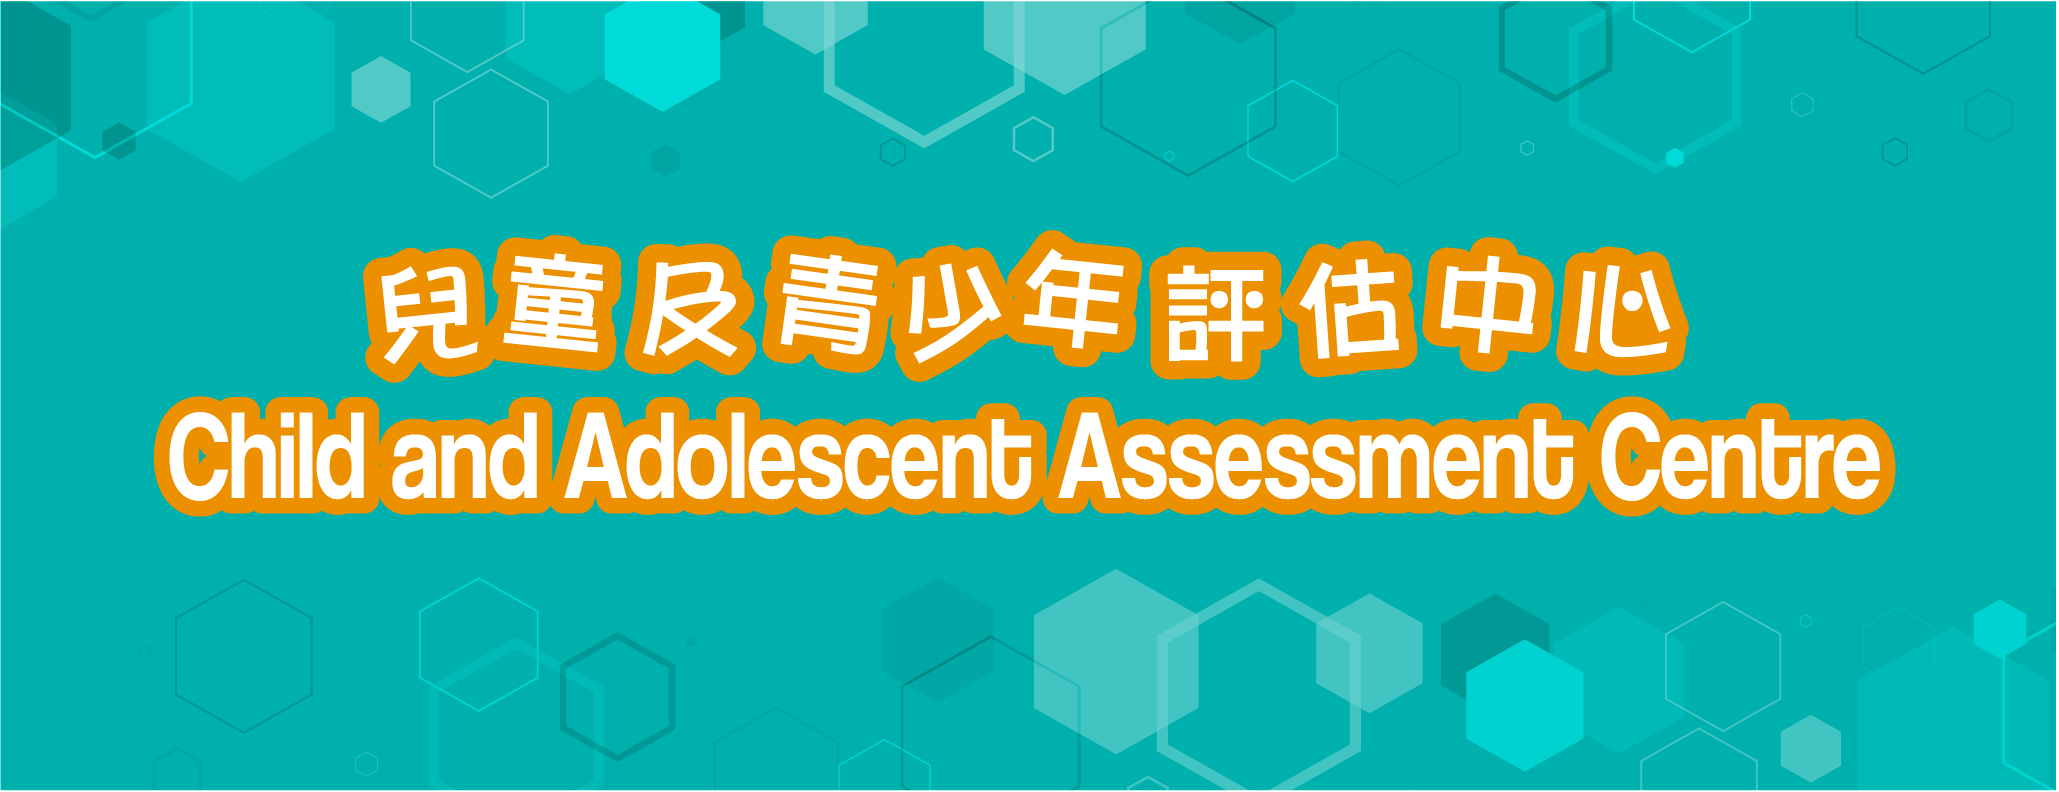 Child and Adolescent Assessment Centre